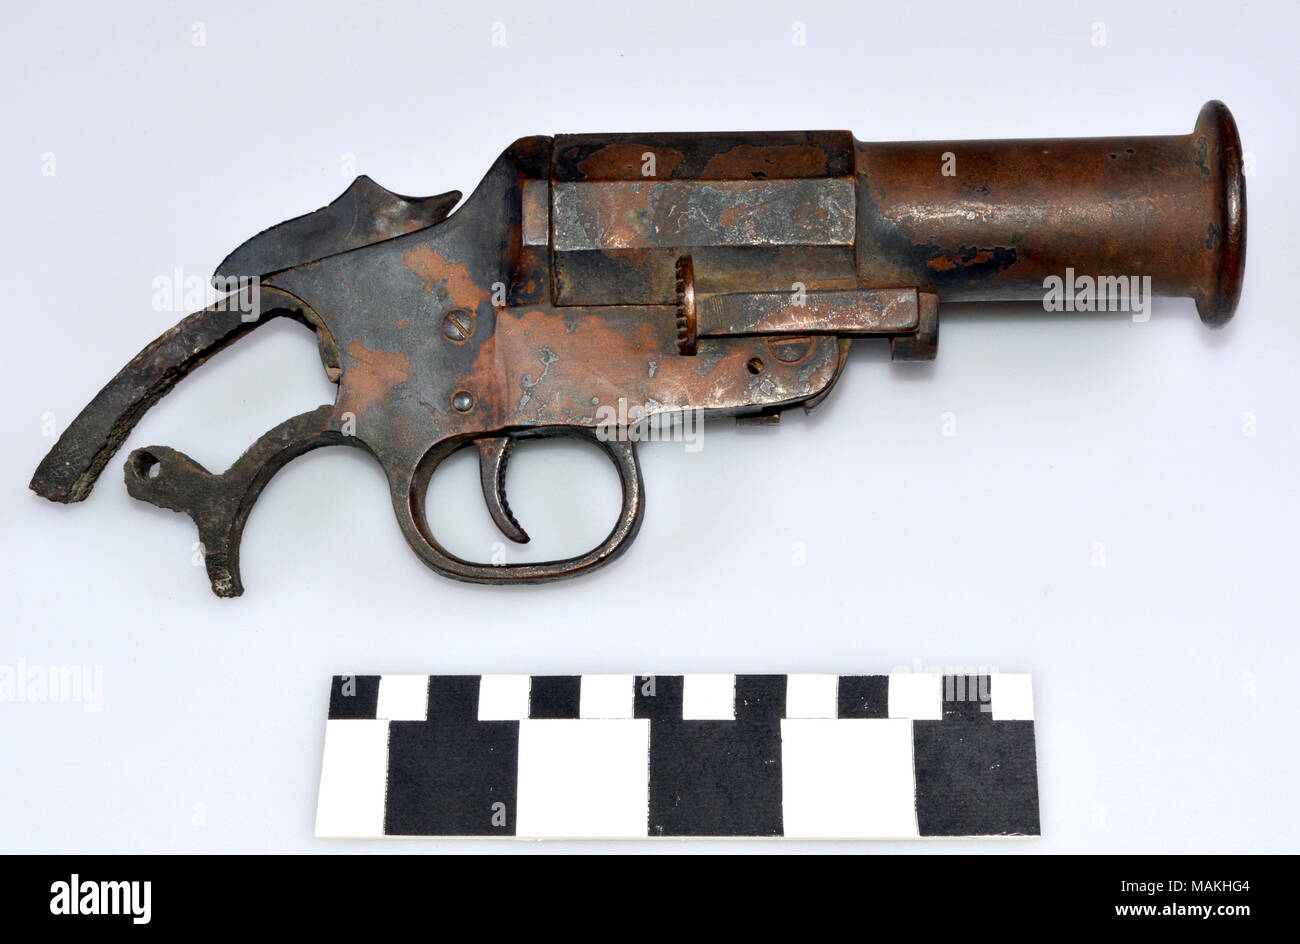 World War I German Naval flare gun or 'star shell' pistol. It would be used for signalling troops or lighting up 'no man's land' during trench warfare. It was brought back as a war trophy by Major Harry S. Crossen, after his service overseas during World War I. Title: World War I German Naval Flare Gun  . circa 1916. Stock Photo